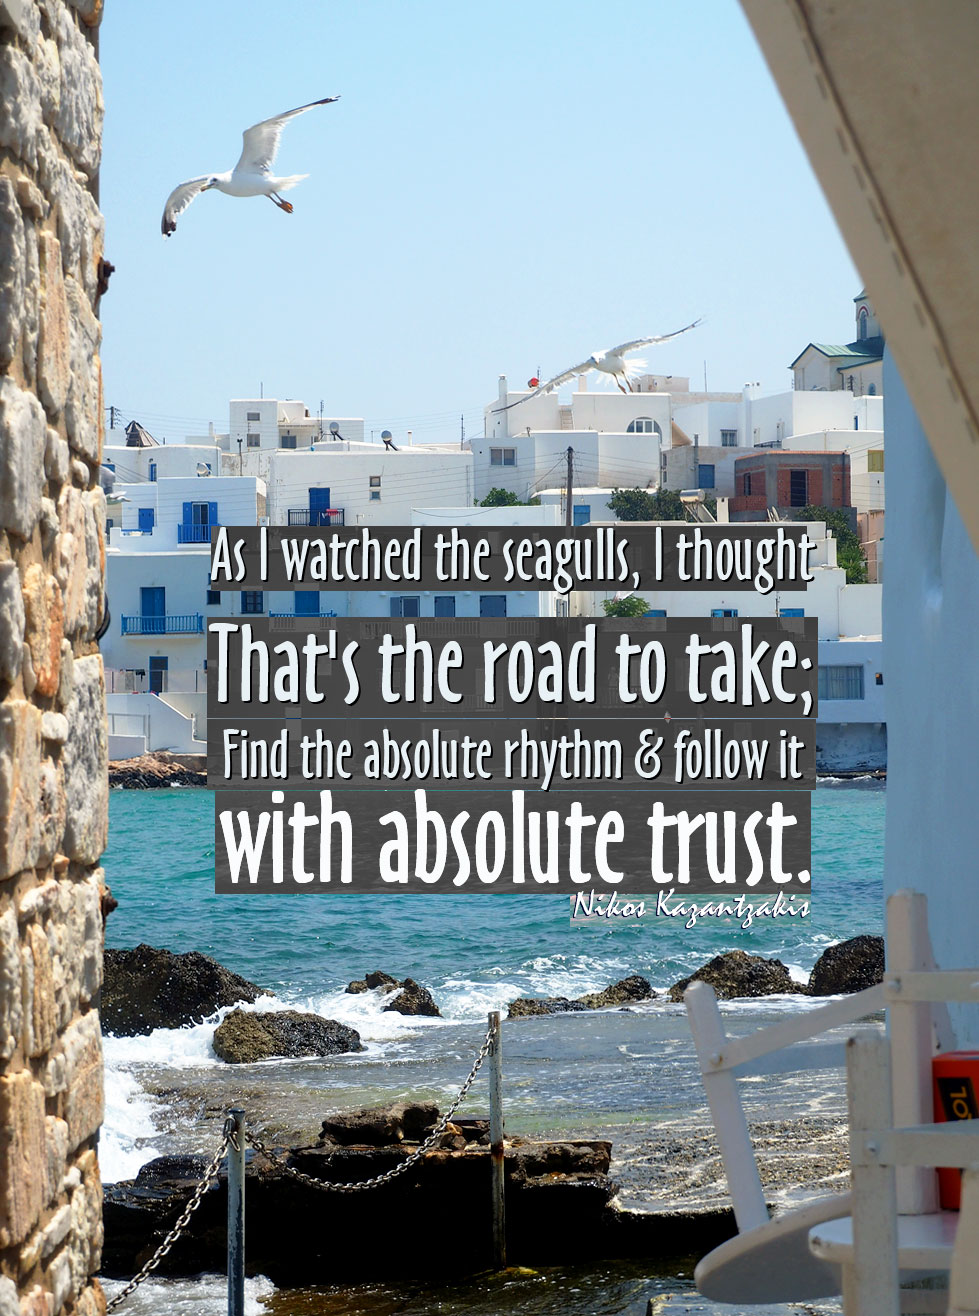 As I watched the seagulls, I thought: That's the road to take; find the absolute rhythm and follow it with absolute trust, Nikos Kazantzakis quotes